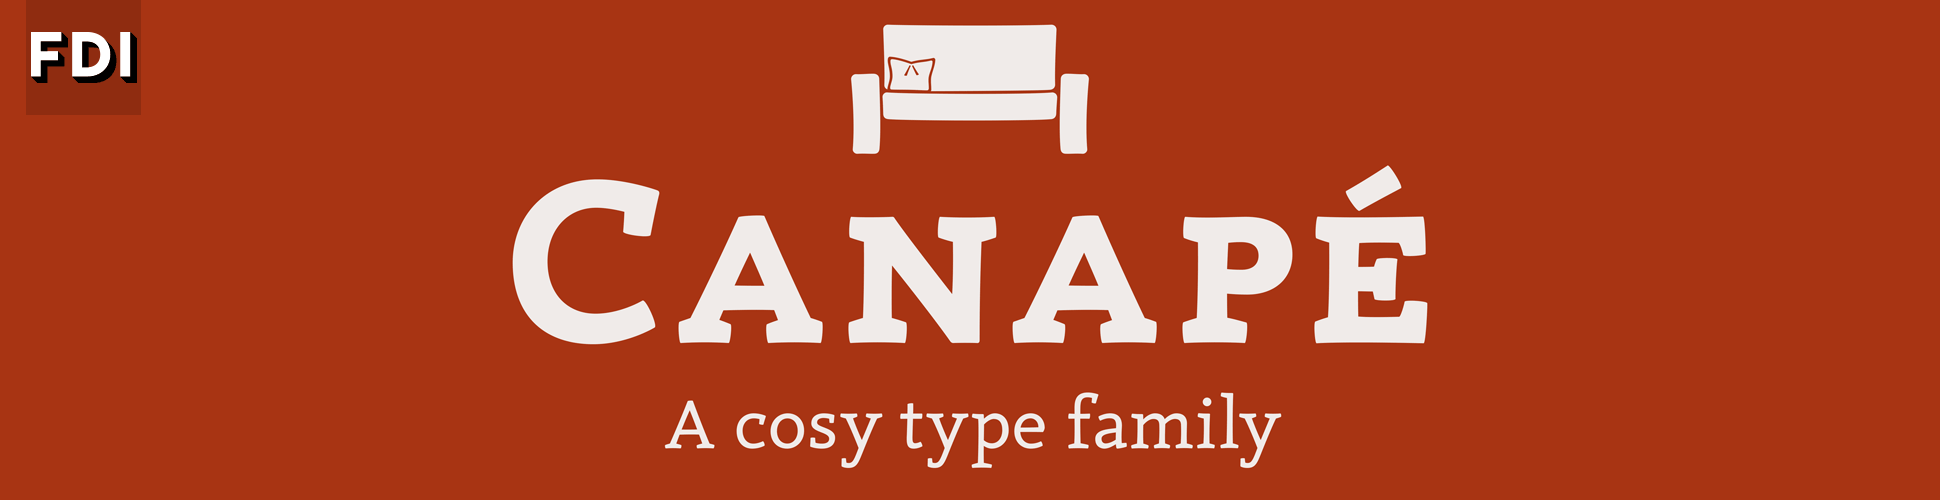 Canape—a cosy type family from FDI Type …